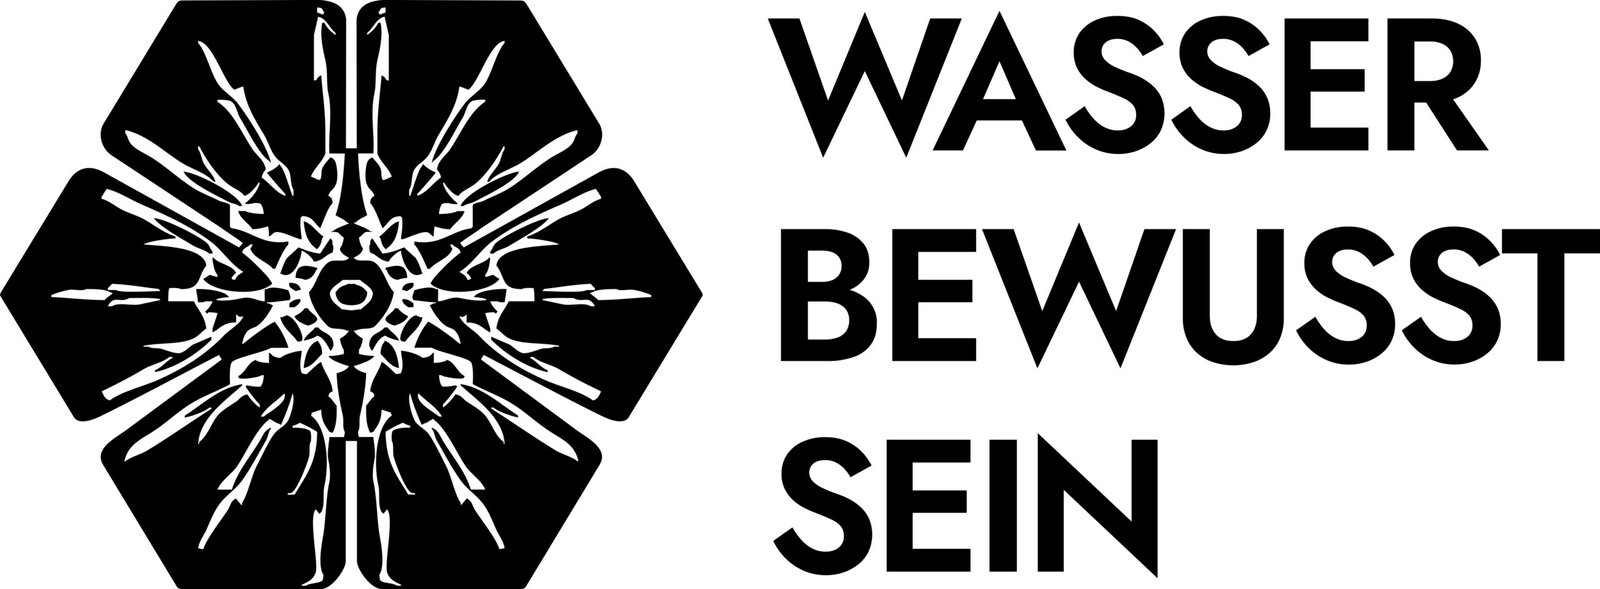 Exclusive Wasser Bewusstseinc Coupon Code – Get Flat 12% Off On All Orders